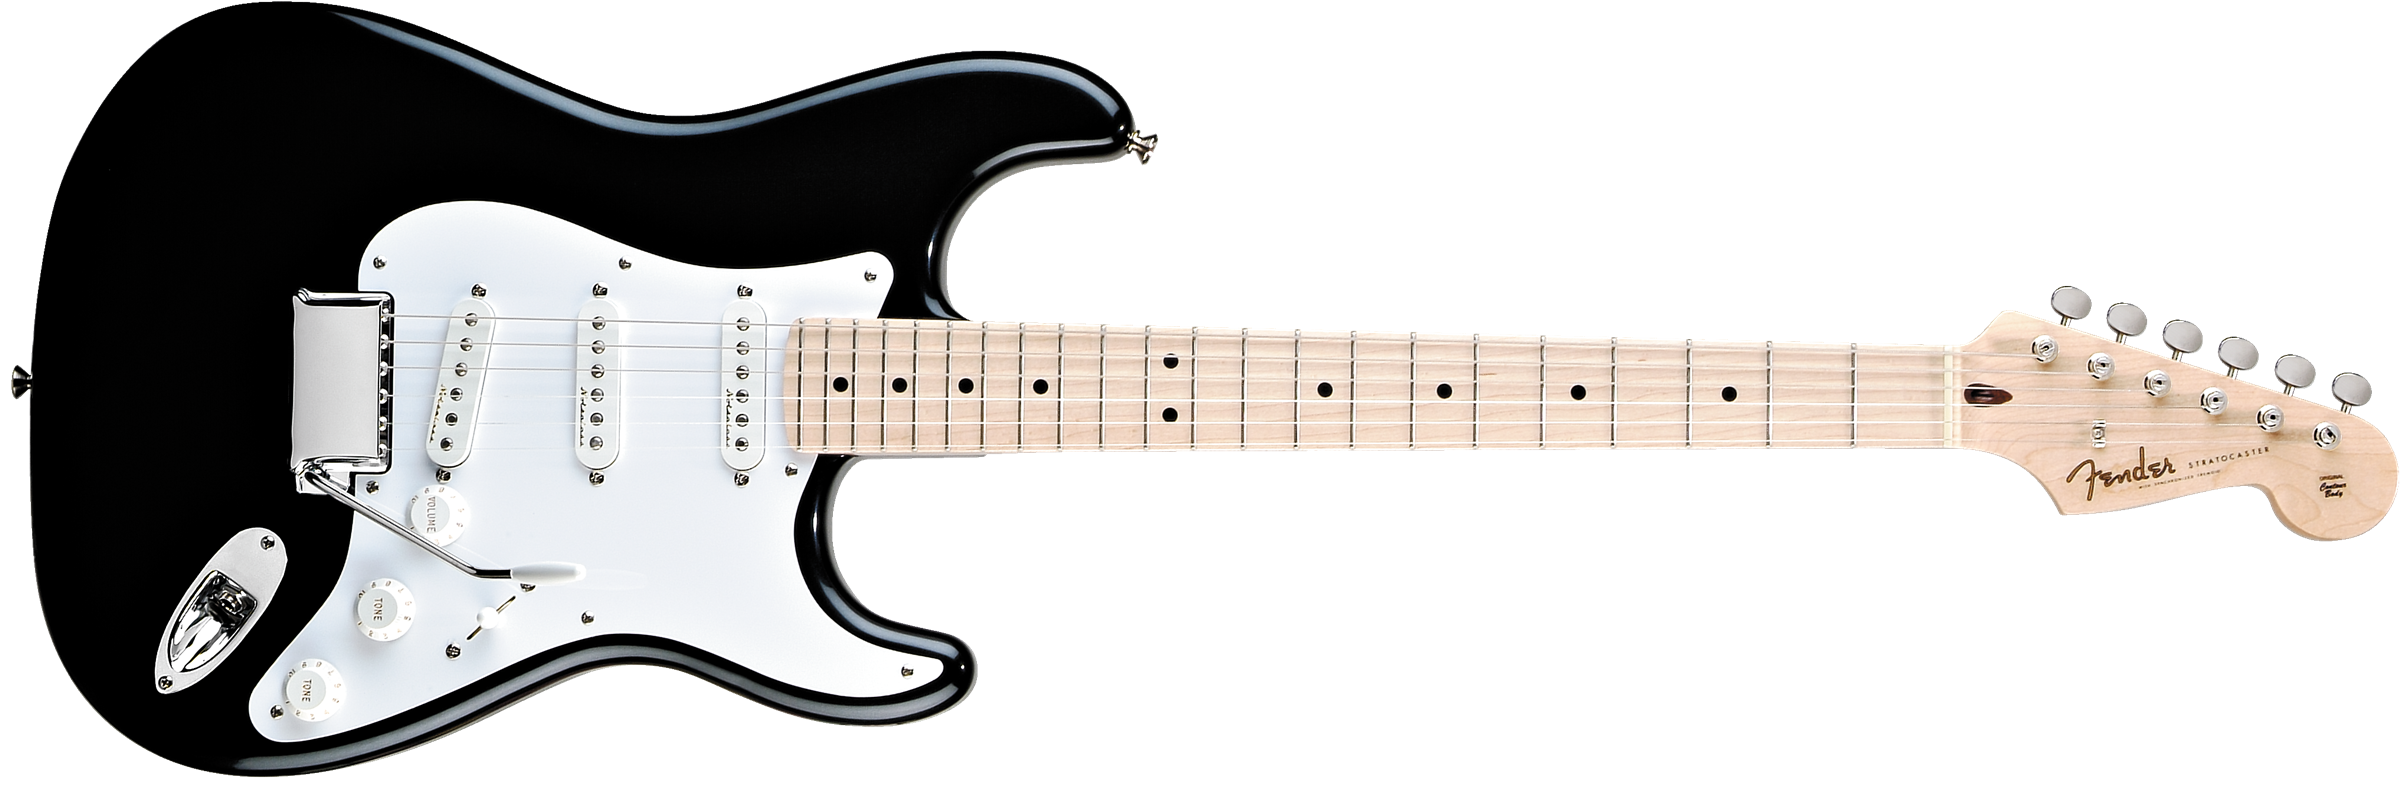 Pictures and images Fender Eric Clapton Signature Stratocaster ...